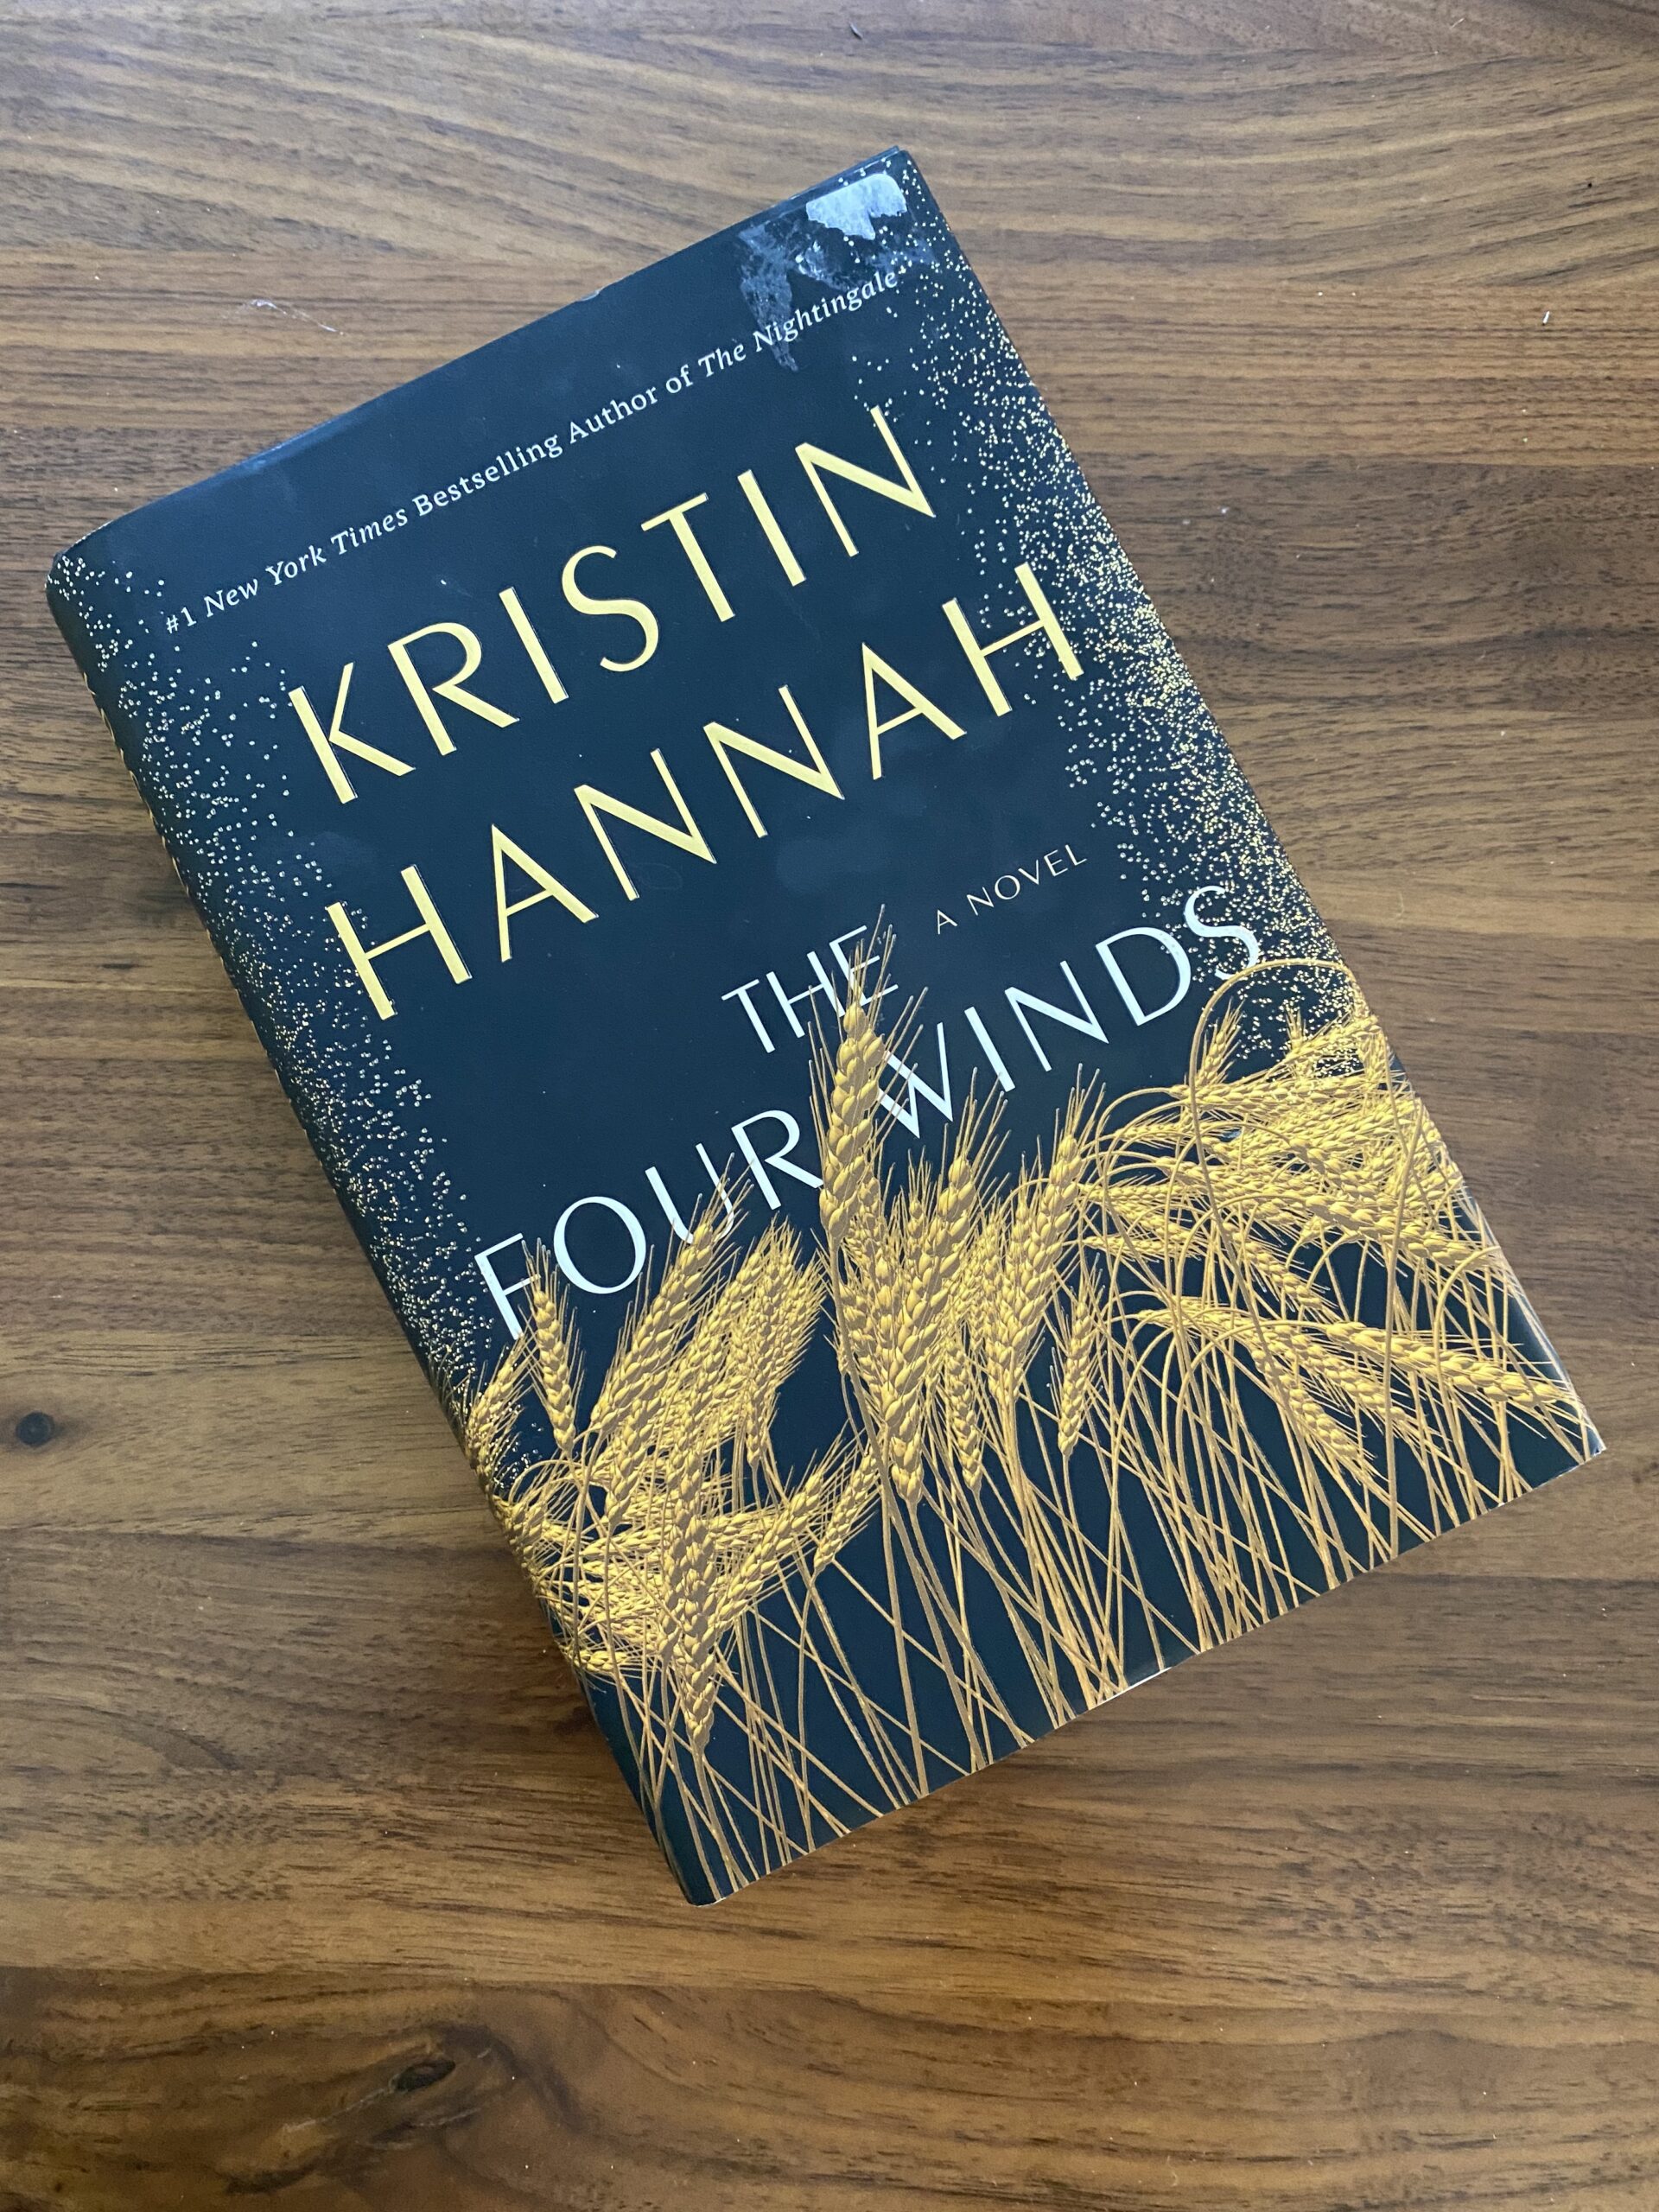 The Four Winds by Kristin Hannah